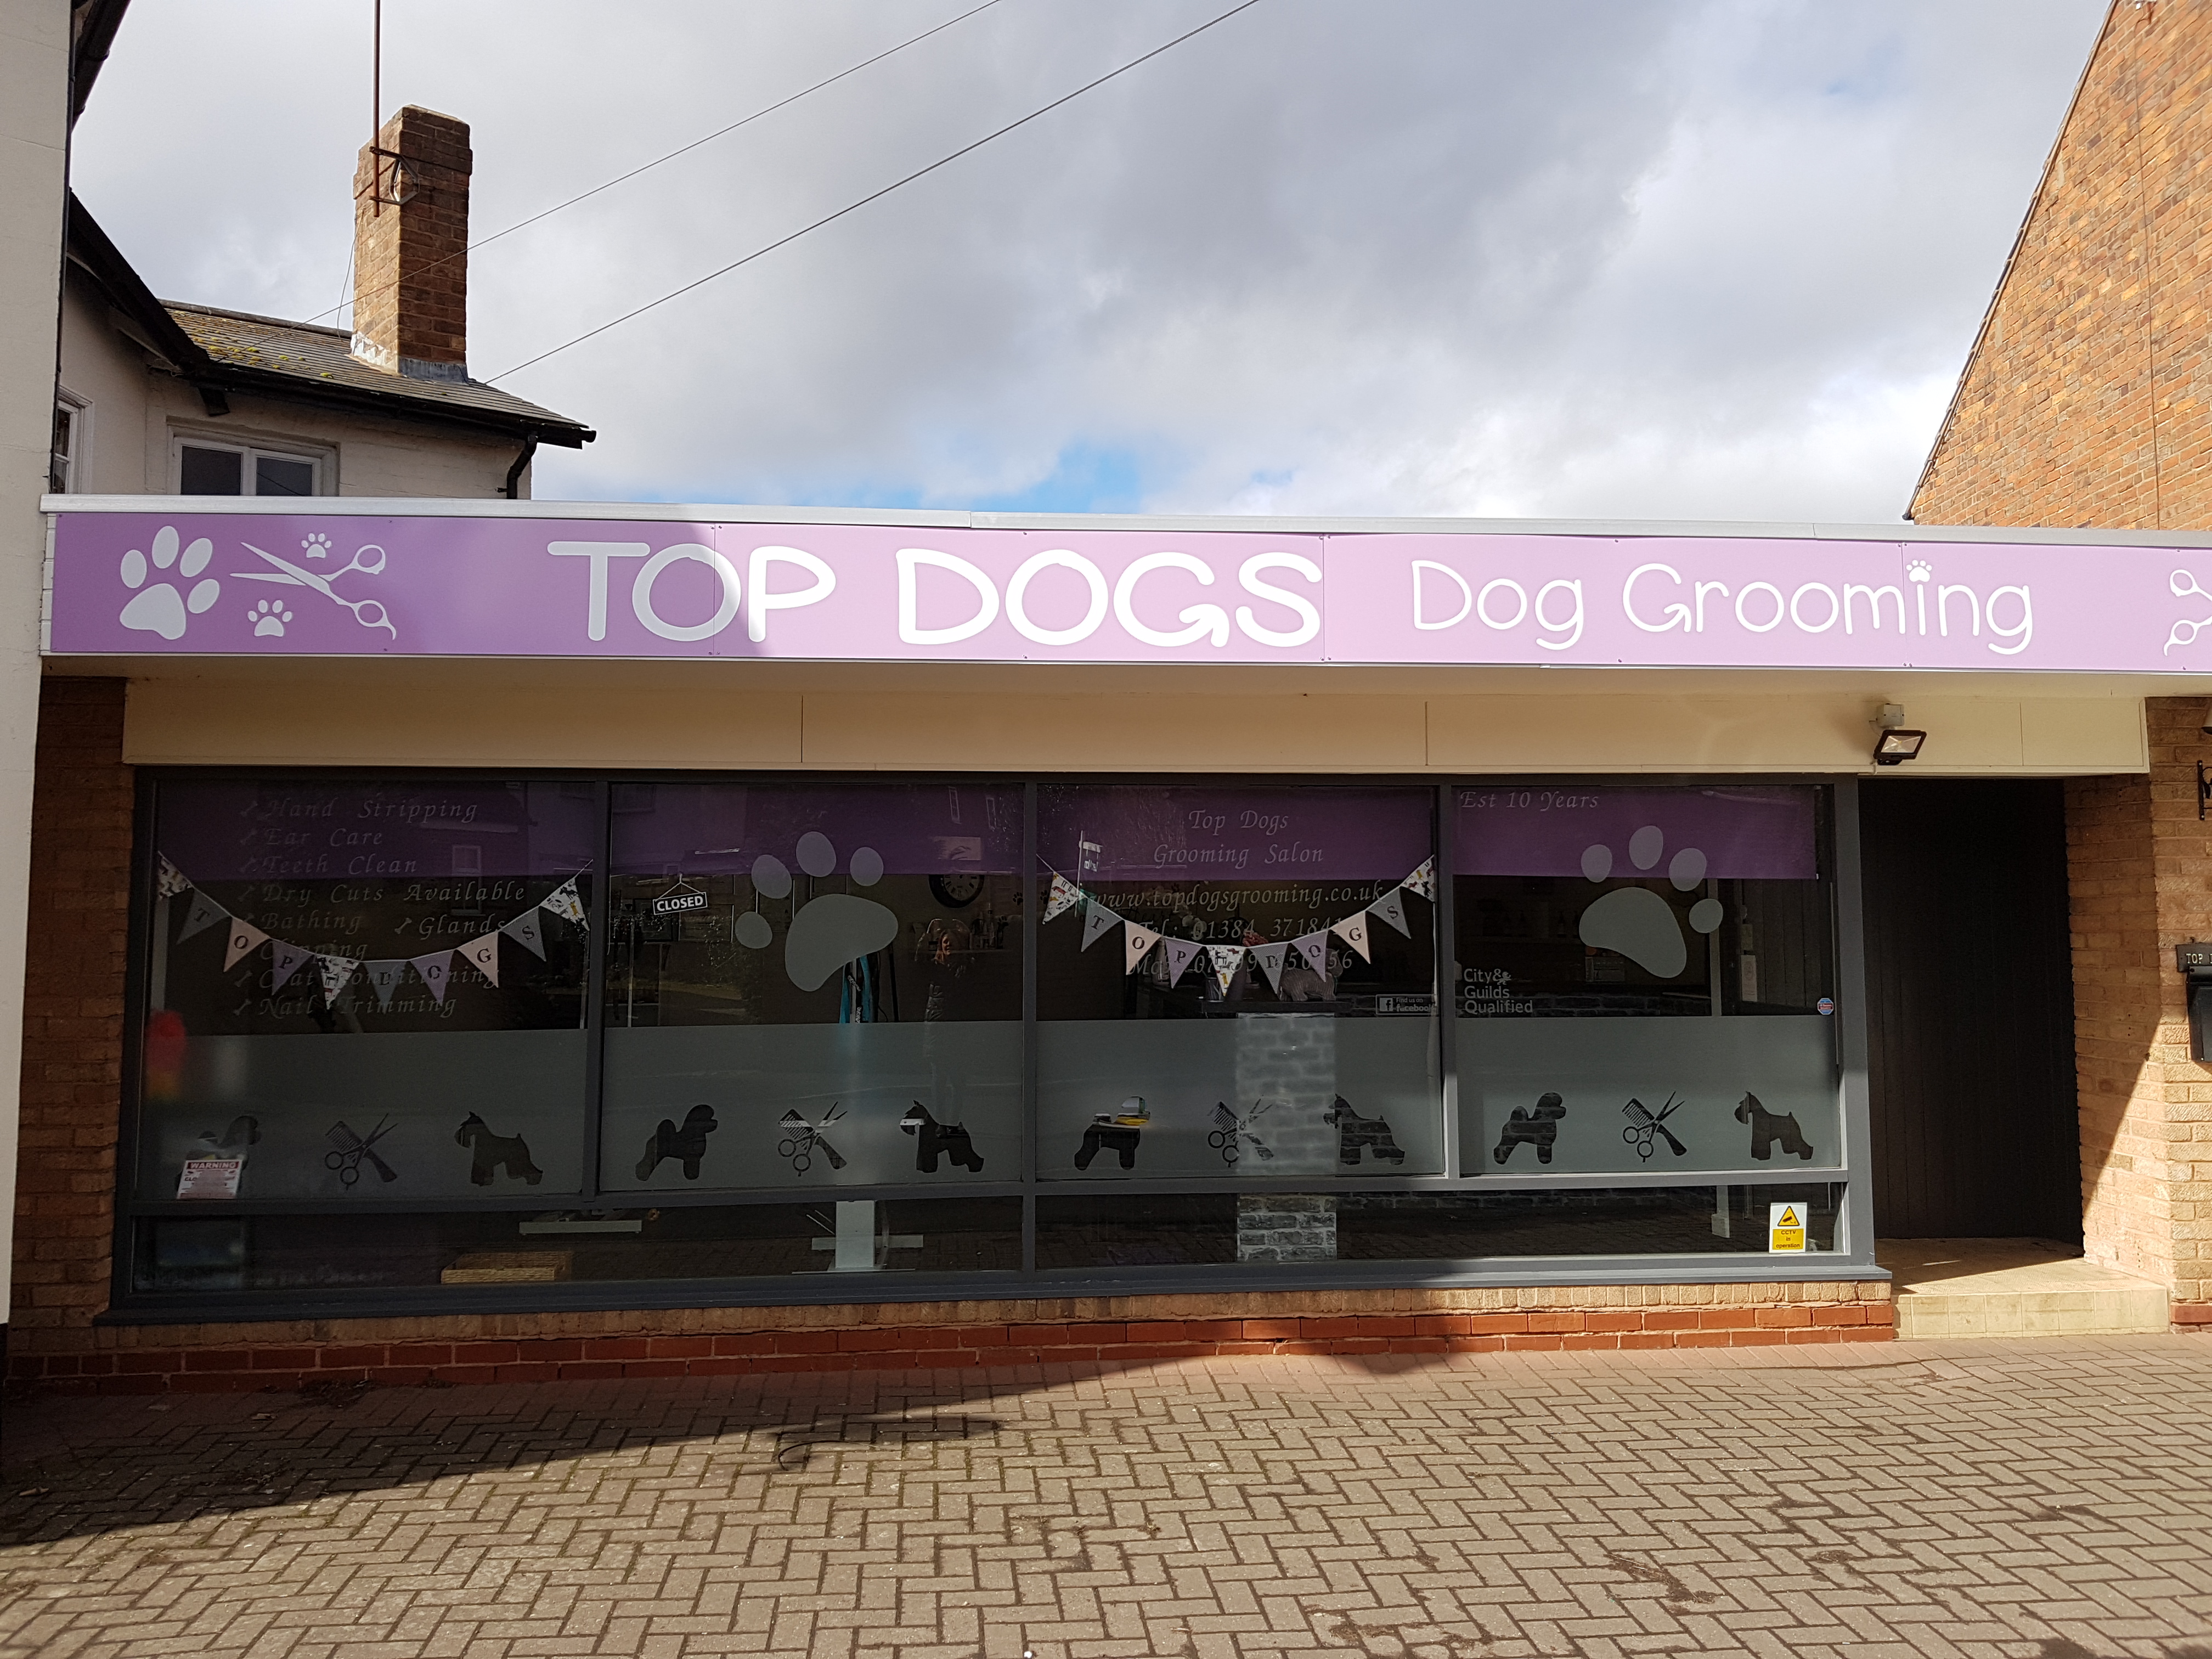 //topdogsgrooming.co.uk/wp-content/uploads/2018/06/20180308_130215.jpg